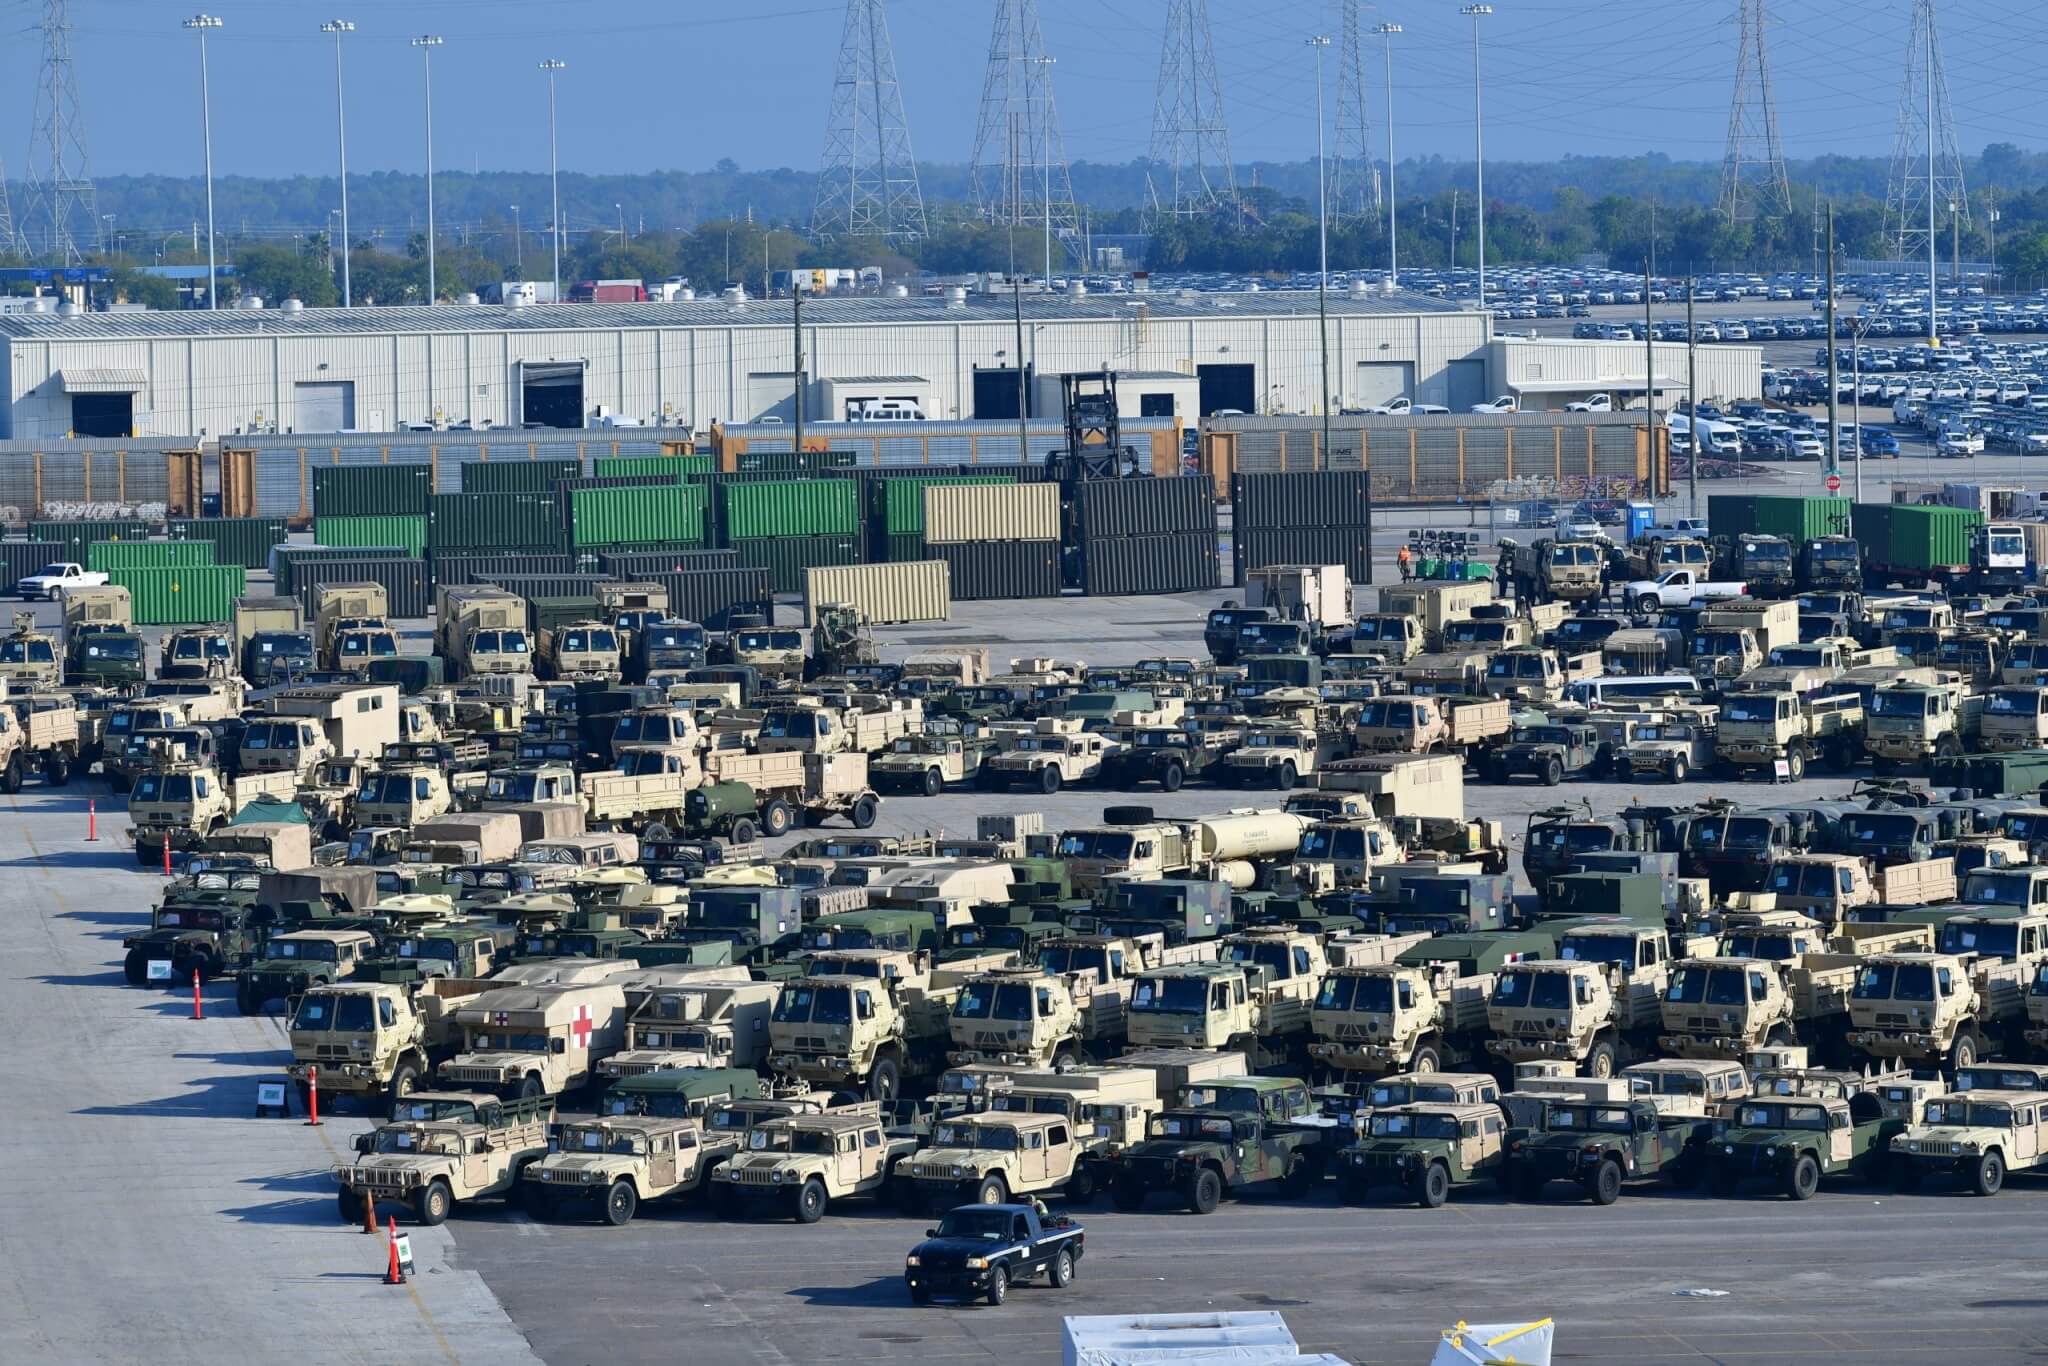 Florida National Guard’s 53d infantry Brigade Combat Team equipment and vehicles are pre-positioned to be loaded on a ship at the Port of Jacksonville. The Military Surface Deployment and Distribution Command is moving around 750 vehicles from this port in support of DEFENDER-Europe 21. Photo by Kimberly Spinner